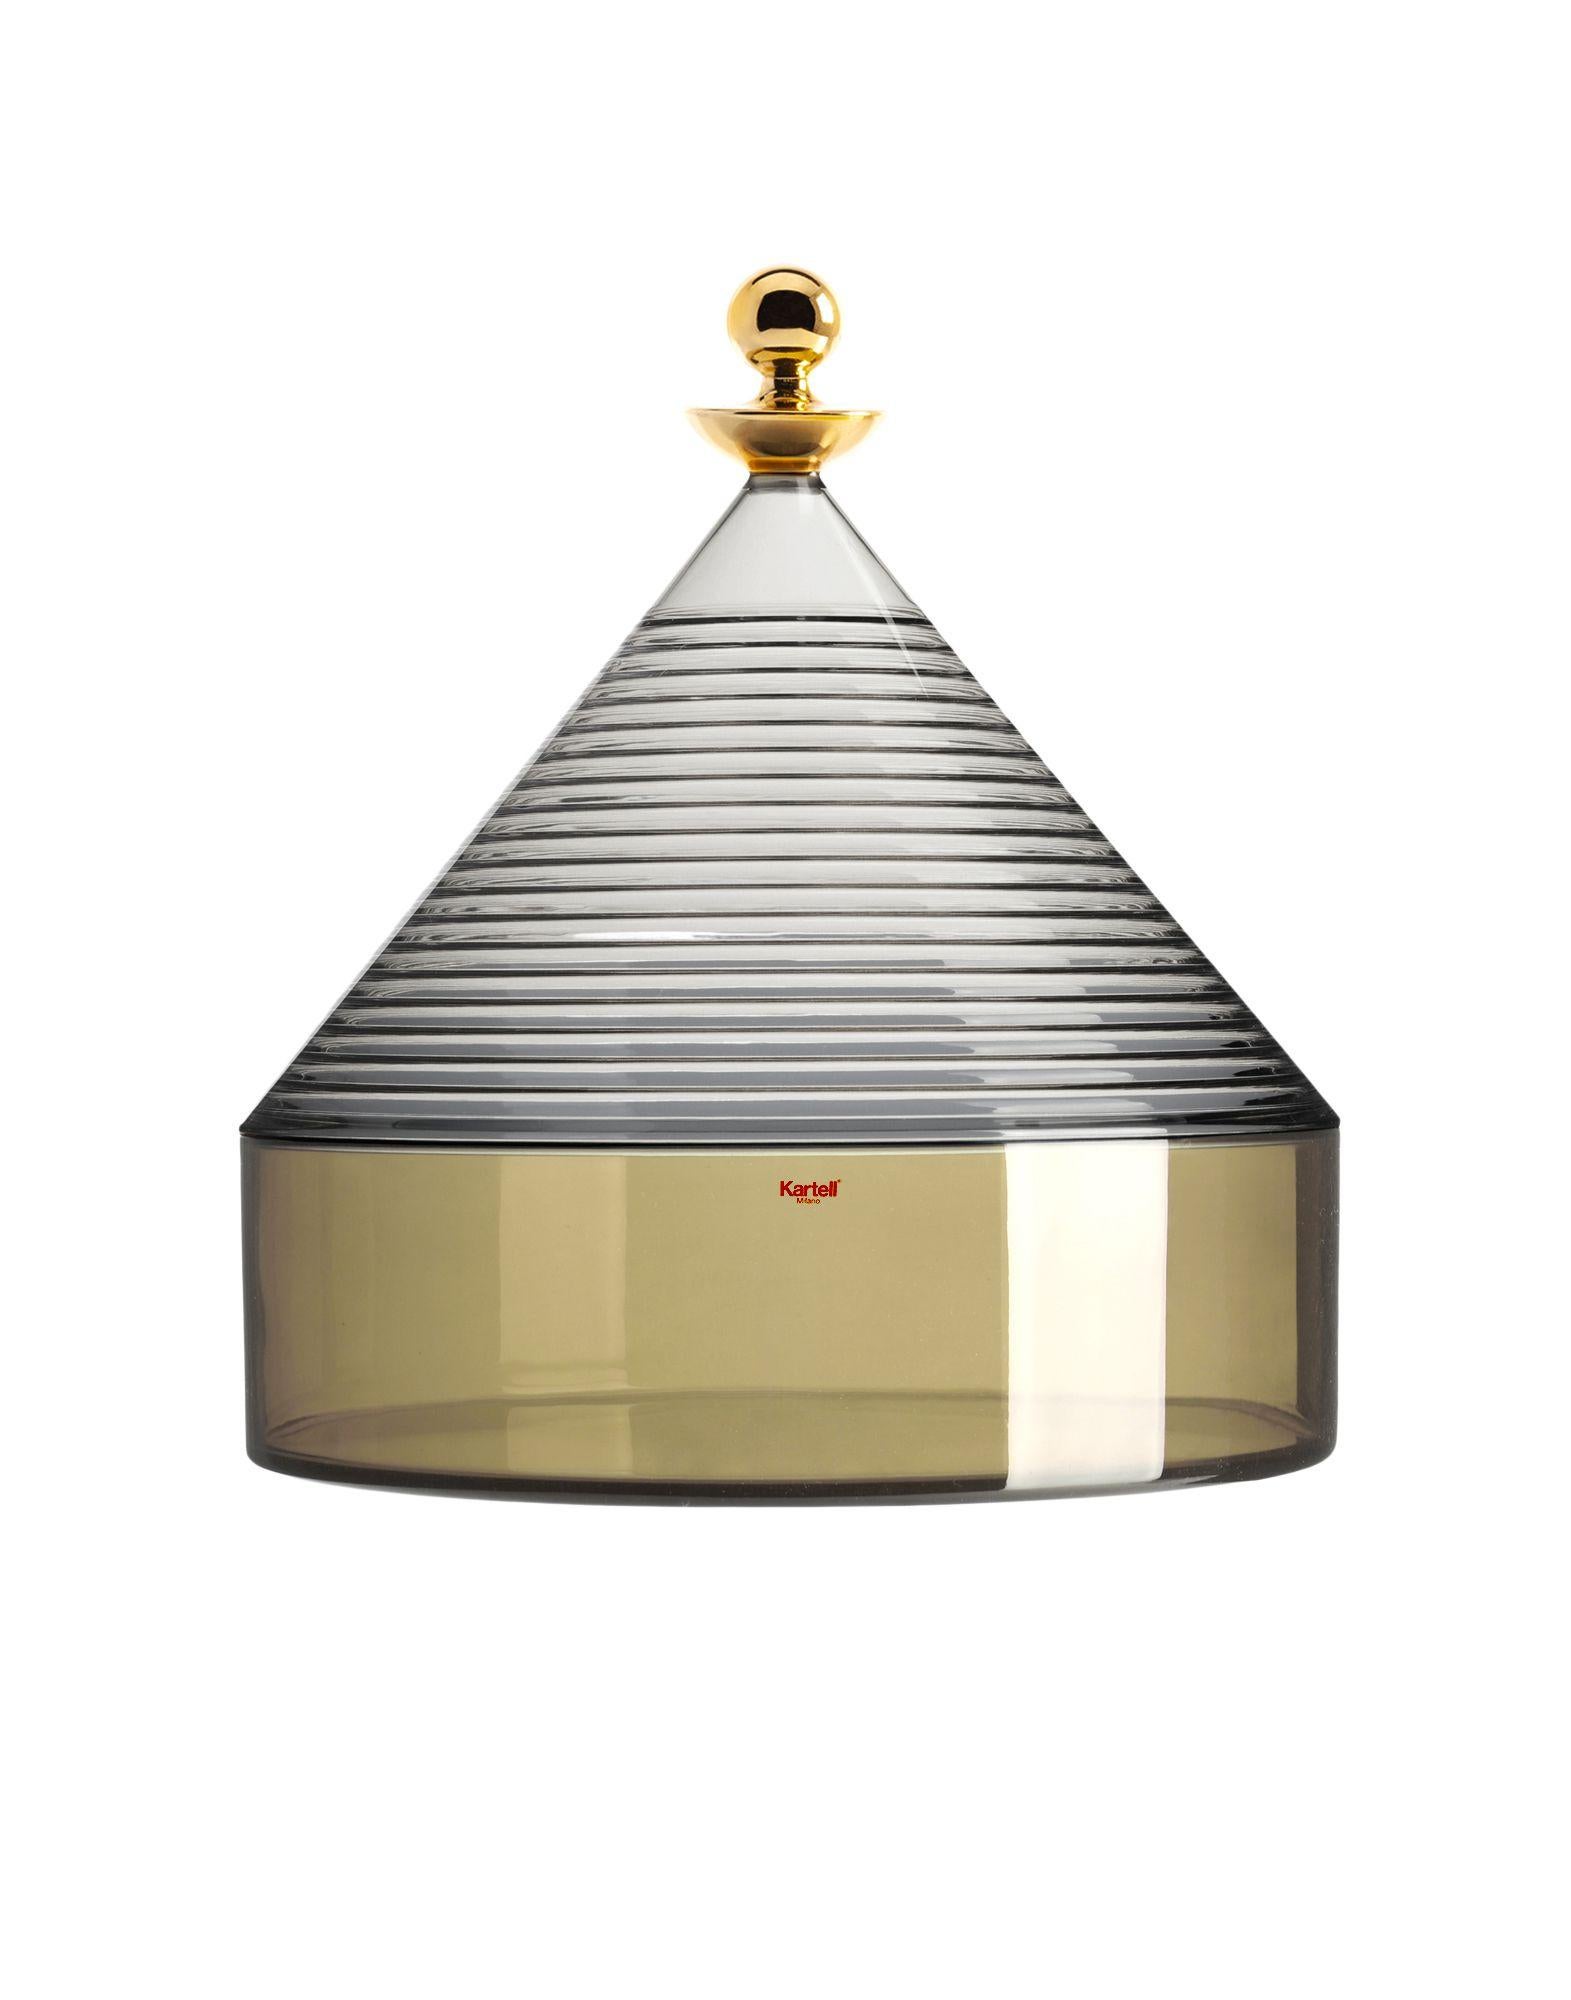 Kartell Trullo Crystal Fume by Fabio Novembre In New Condition For Sale In Brooklyn, NY